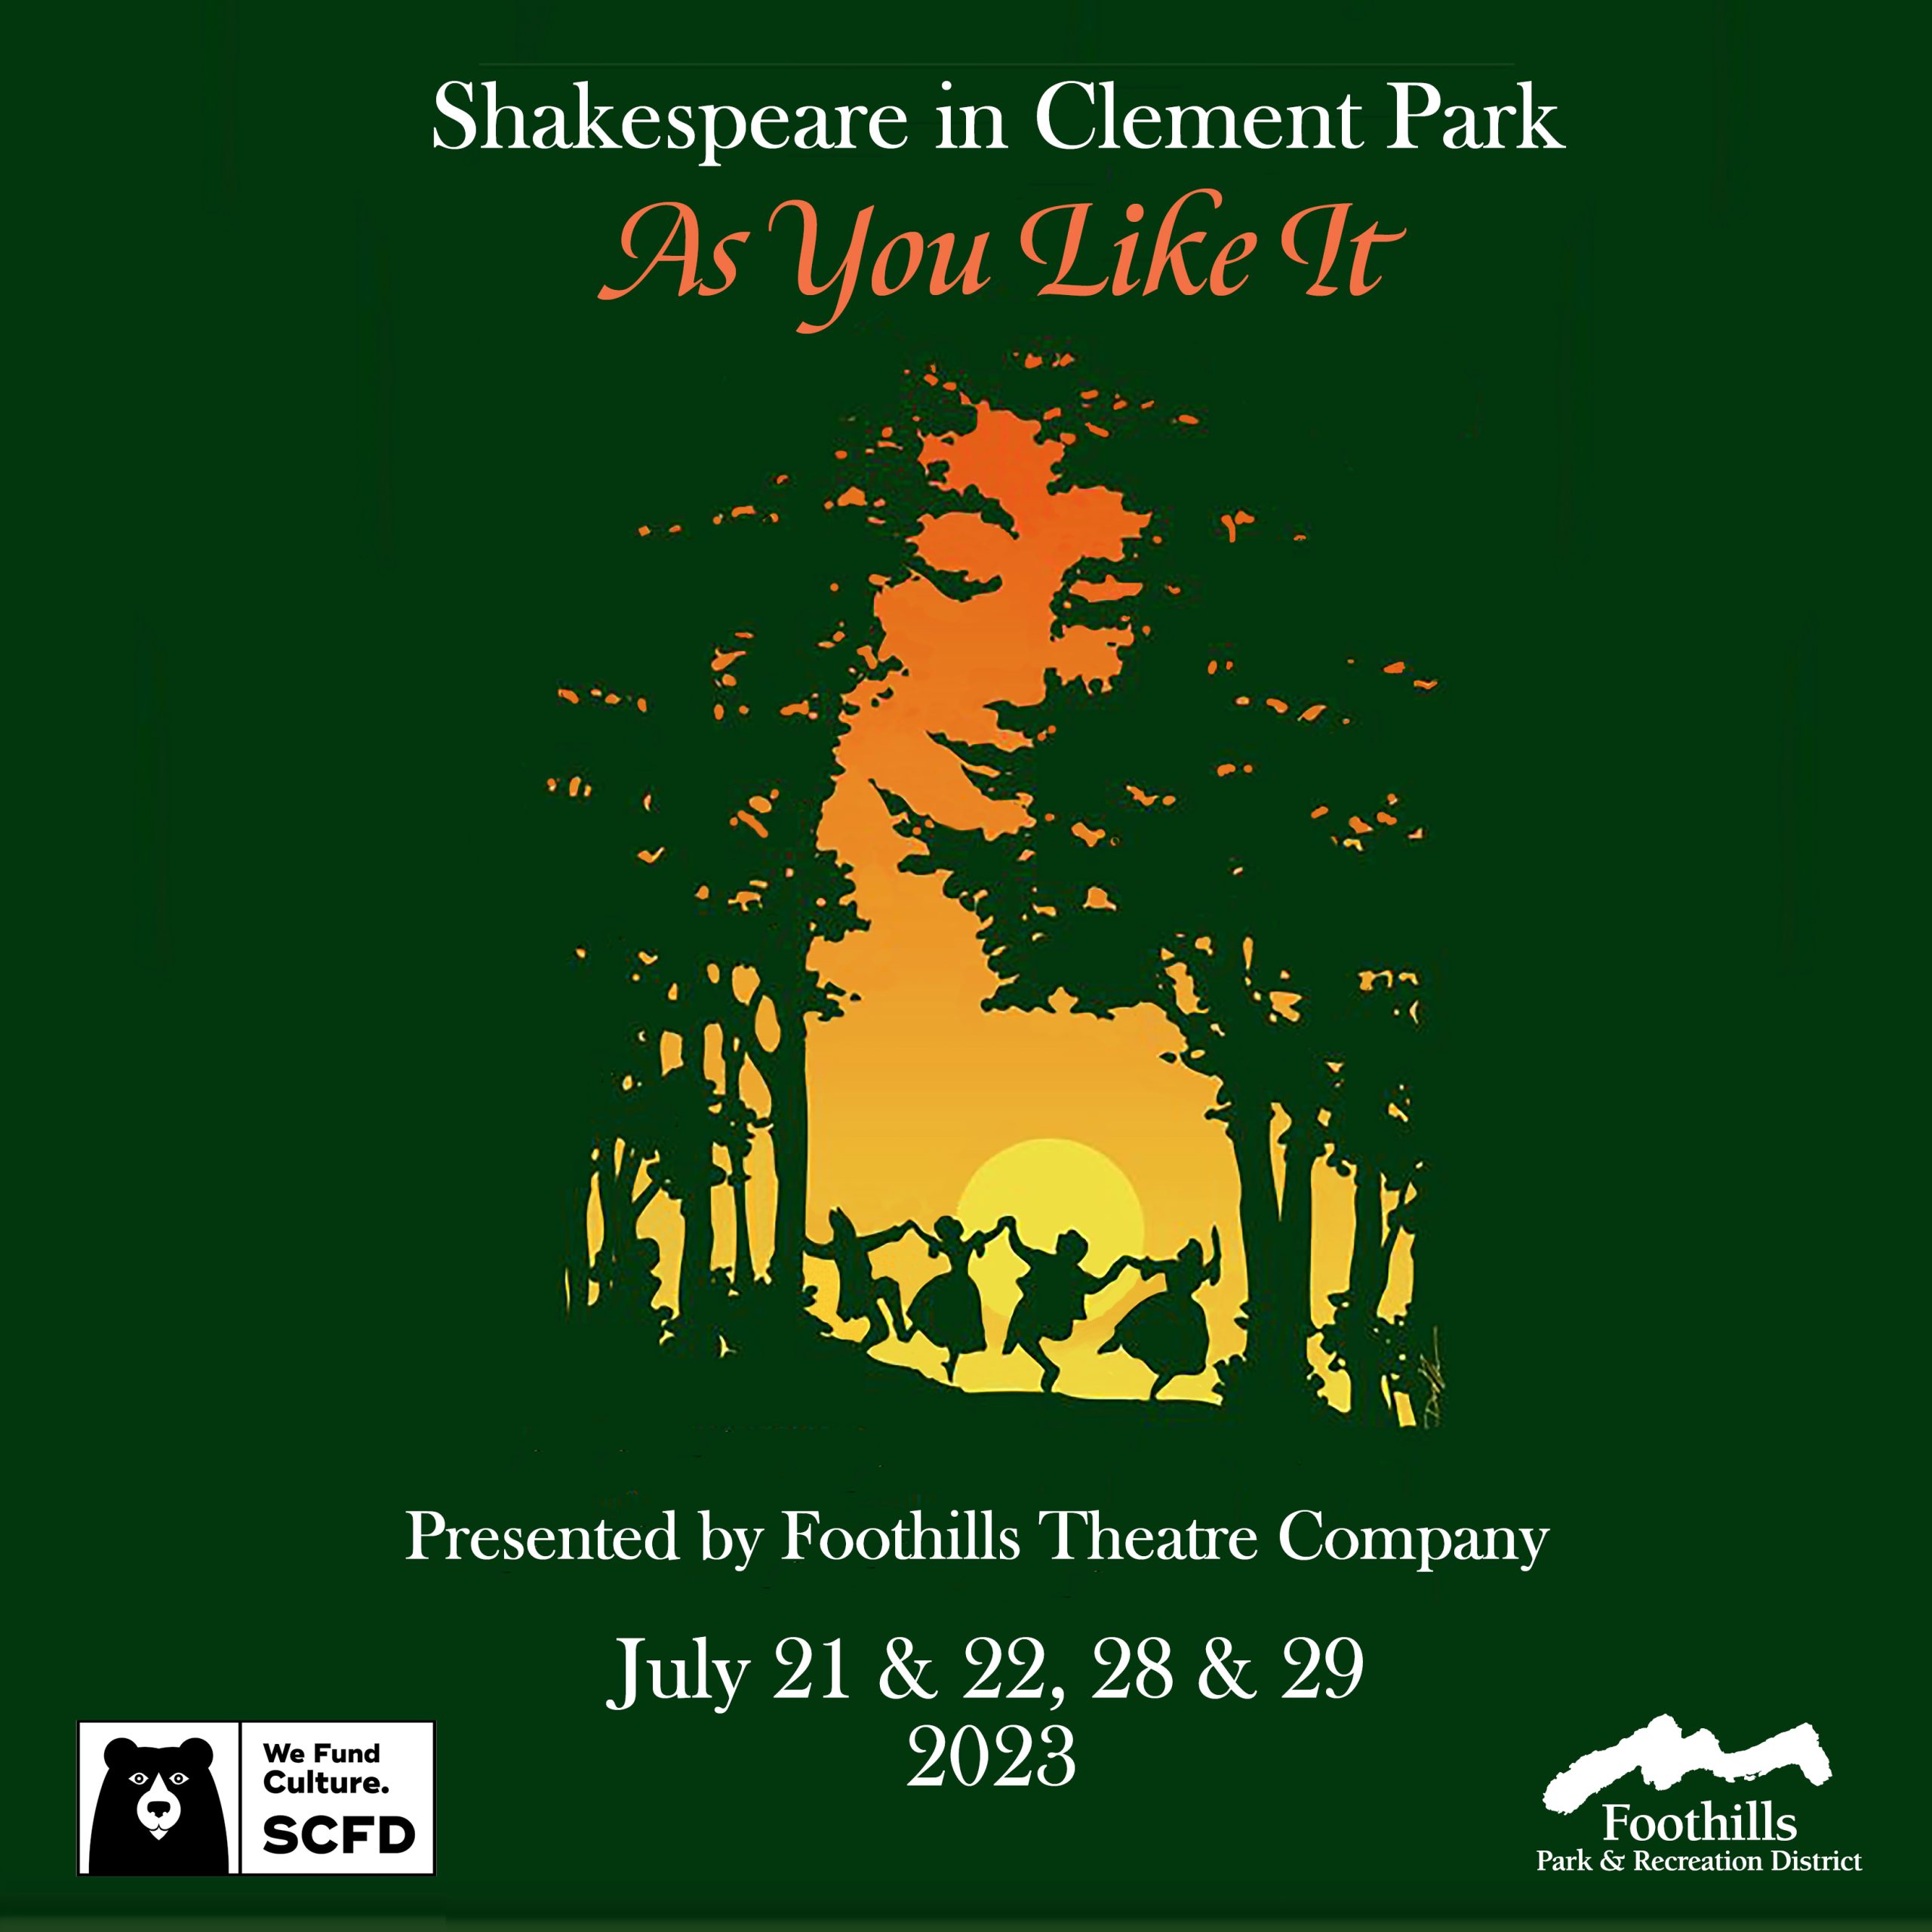 As You Like It, Shakespeare in Clement Park promotional image - 2023